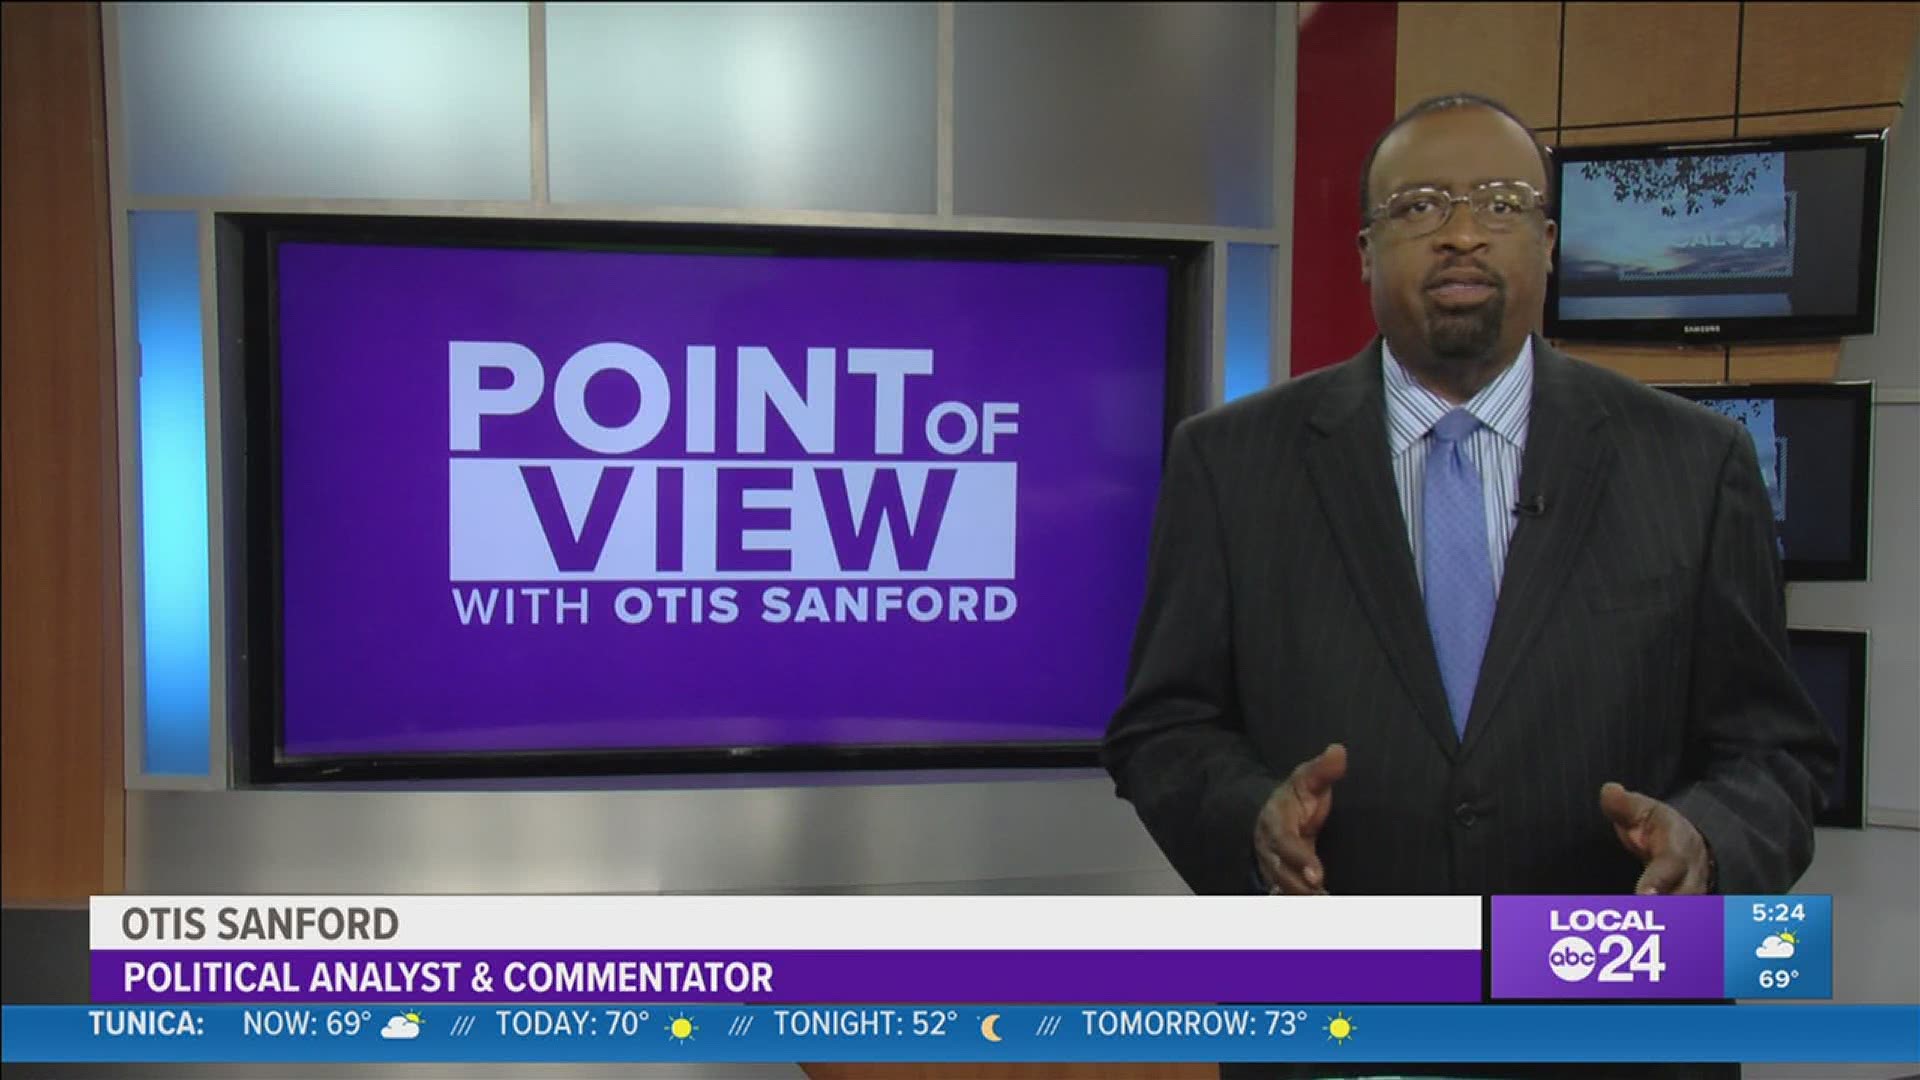 Local 24 News political analyst and commentator Otis Sanford shares his point of view on the effort to get people to get vaccinated.